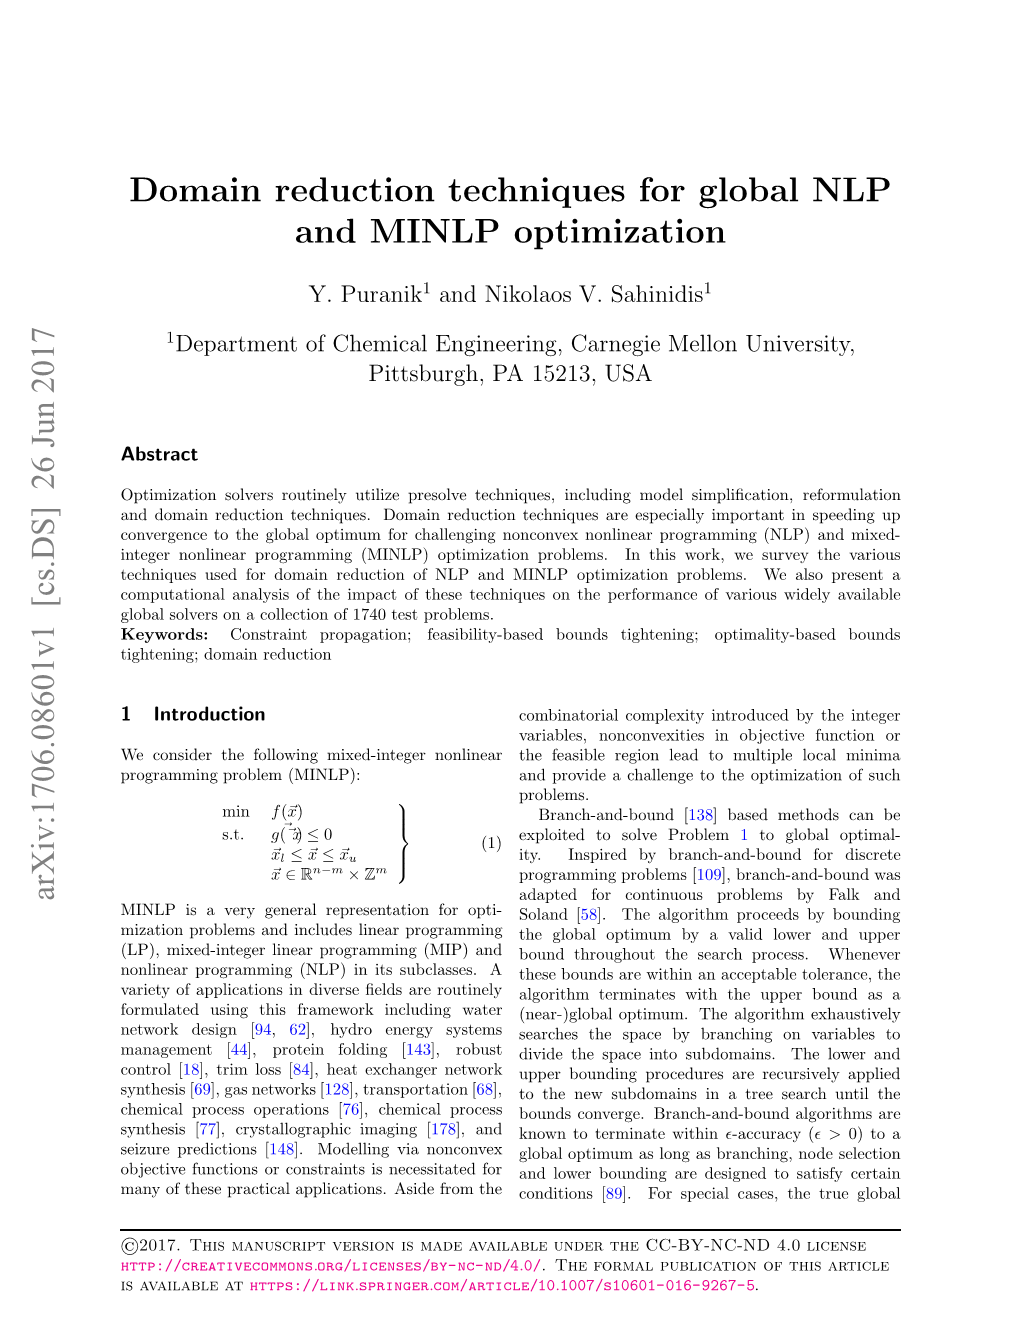 Domain Reduction Techniques for Global NLP and MINLP Optimization 2